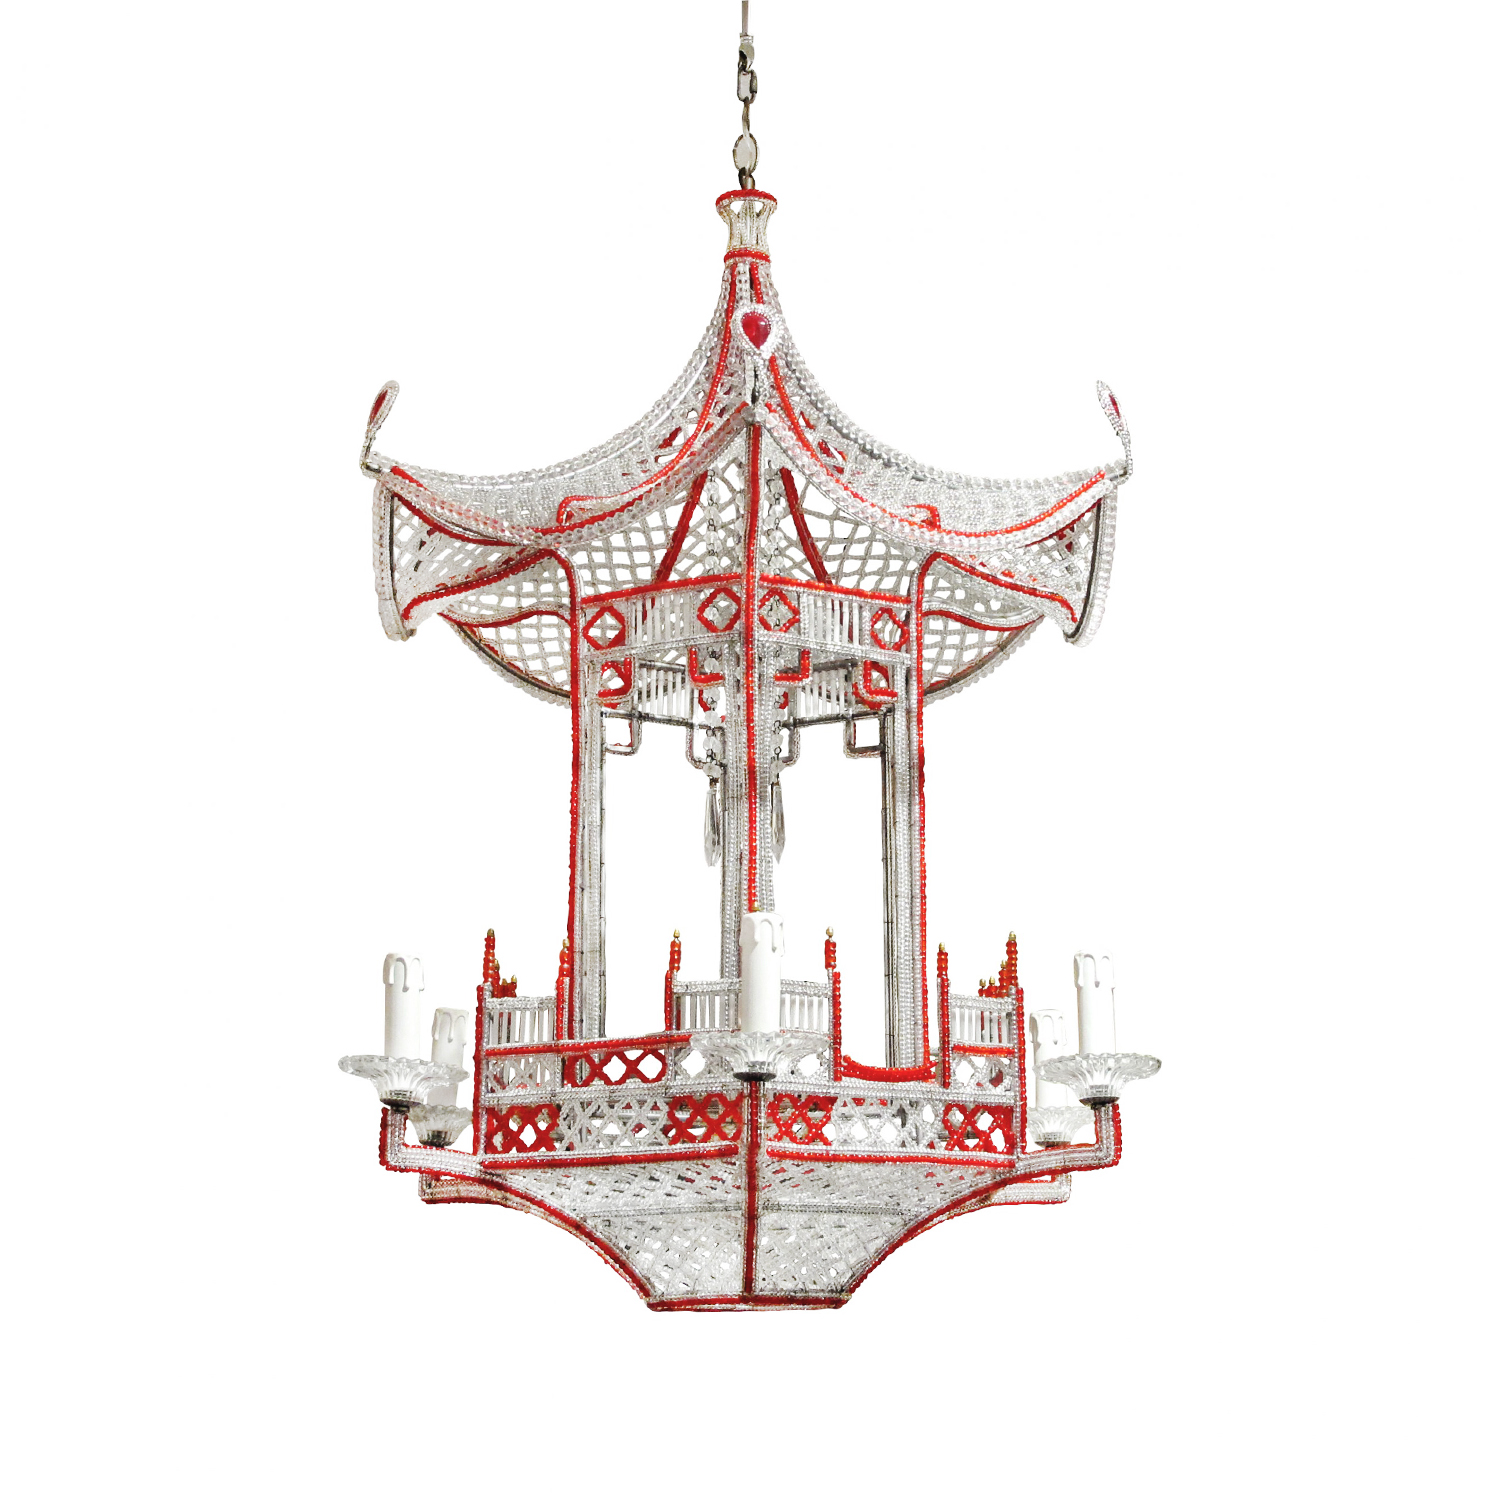 20th Century French Art Deco Crystal Pagoda Light Attributed to Maison Baguès